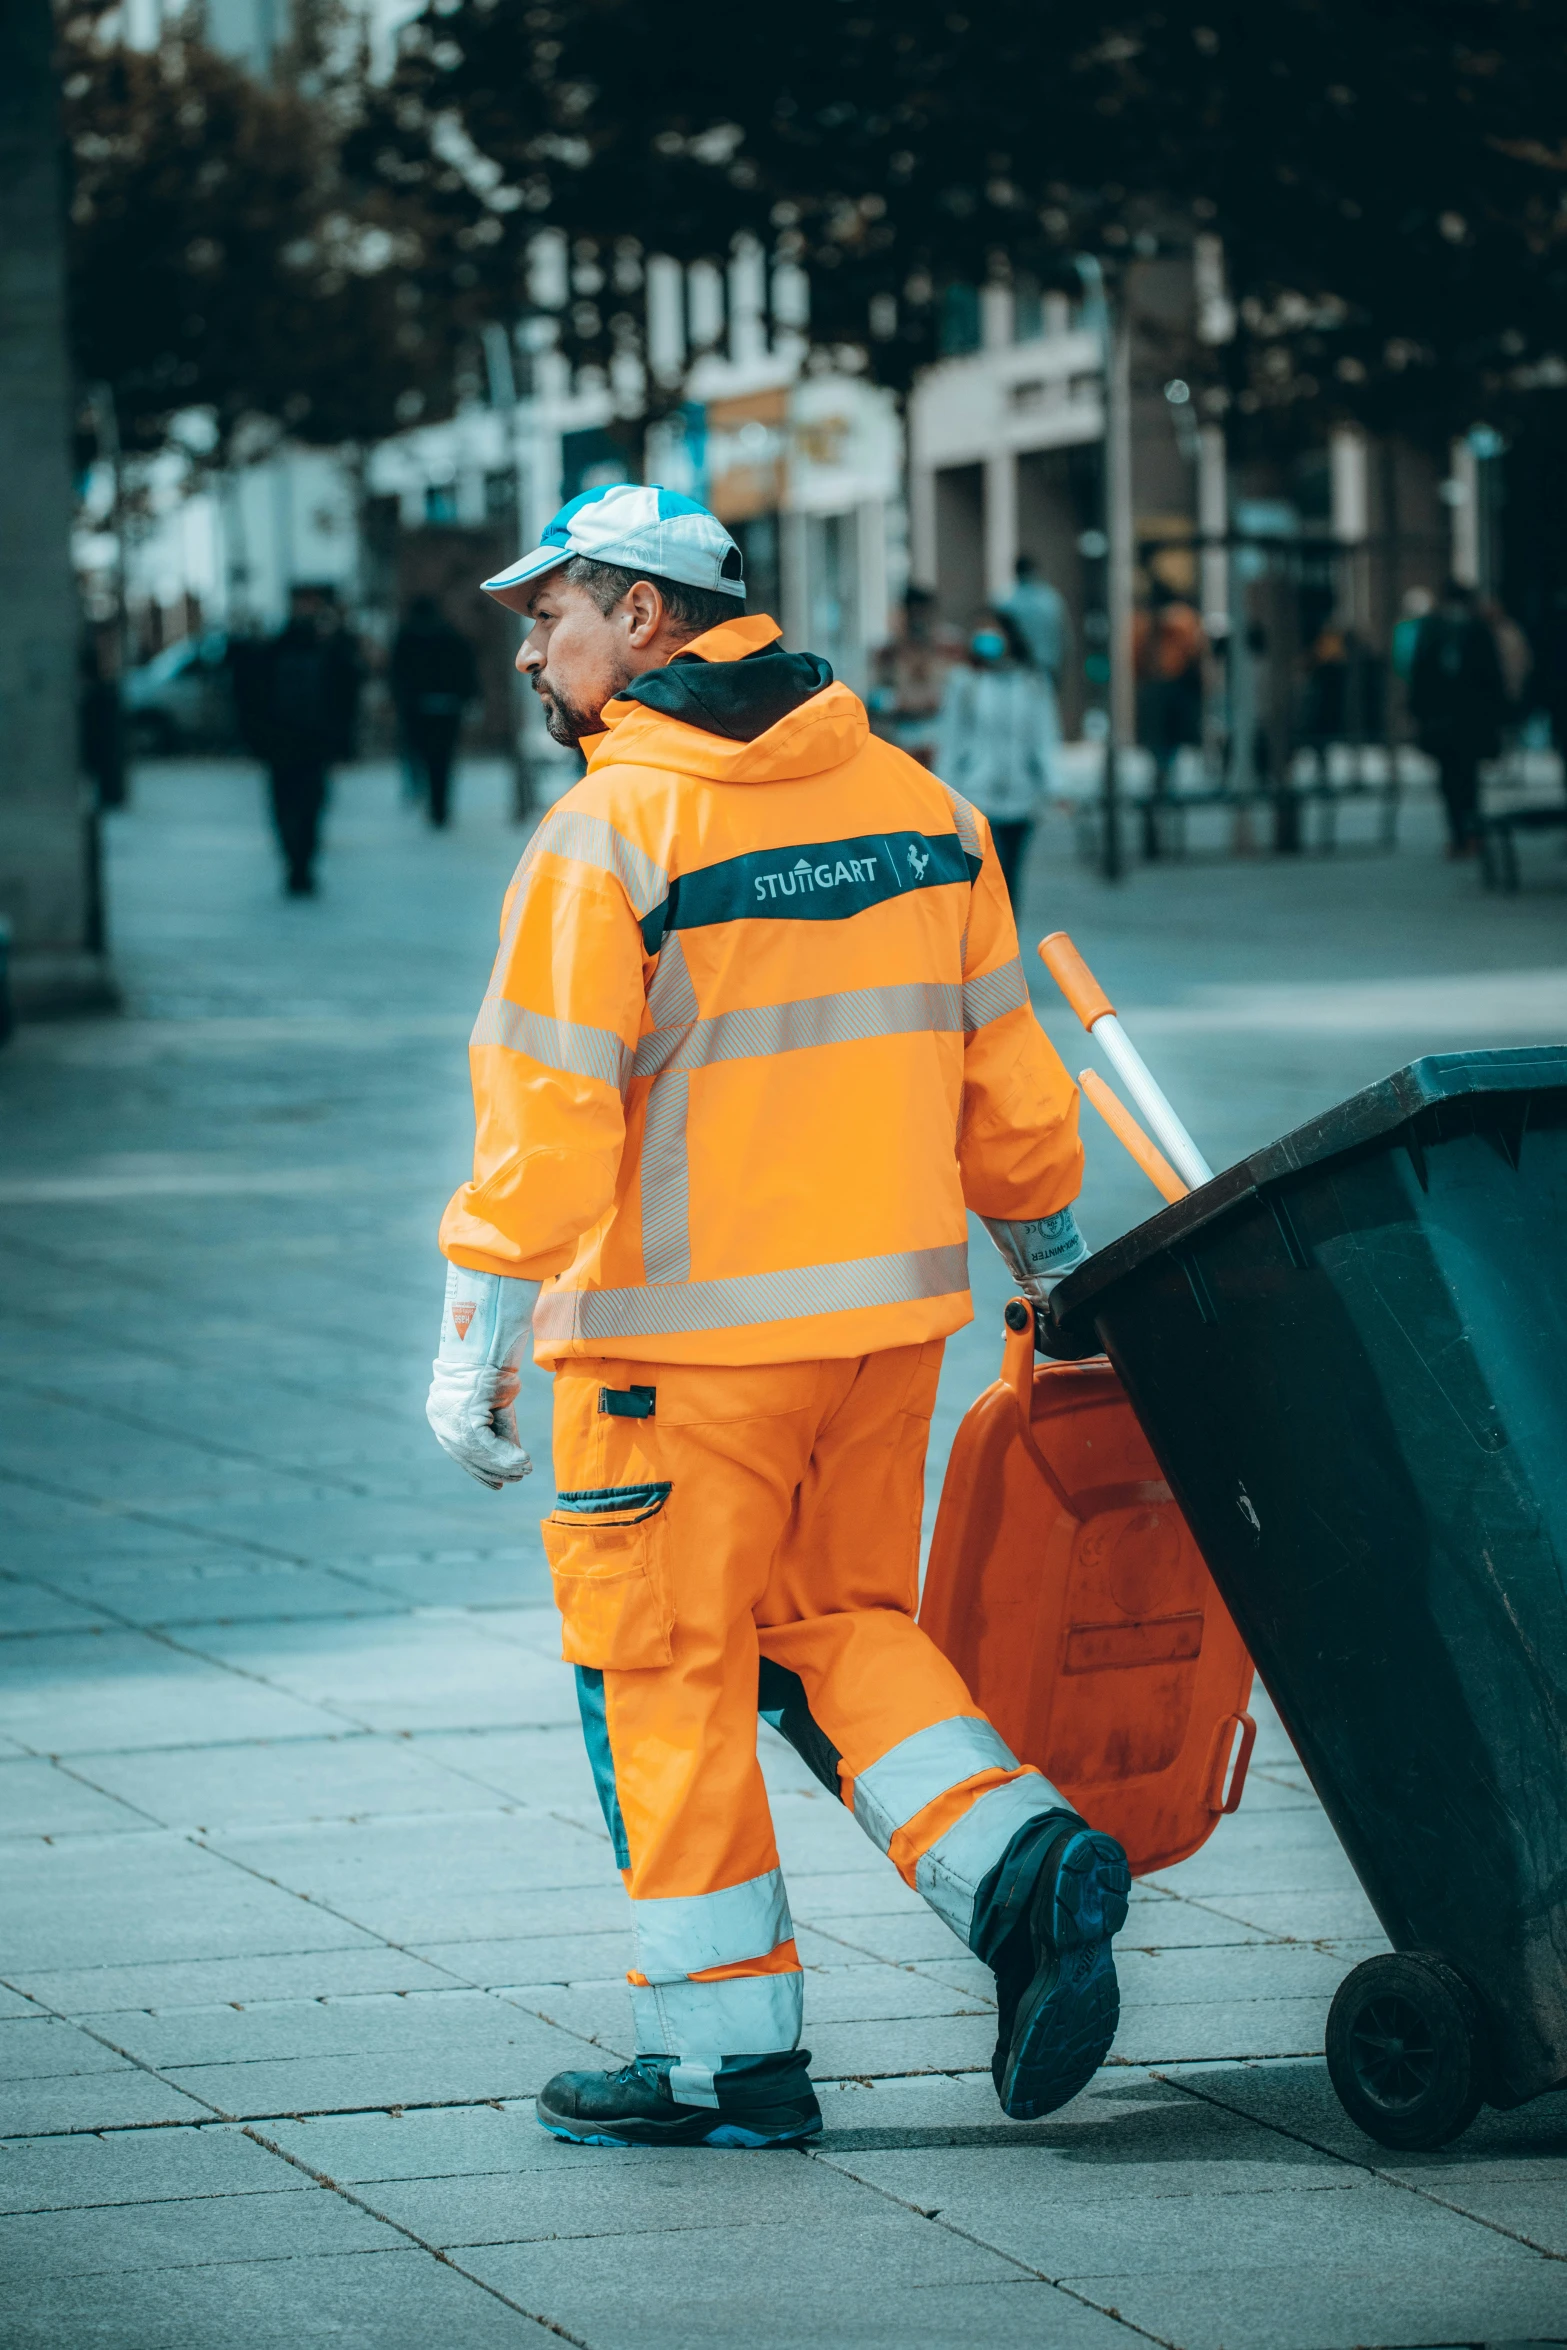 a man in safety gear hing a barrel next to a garbage can